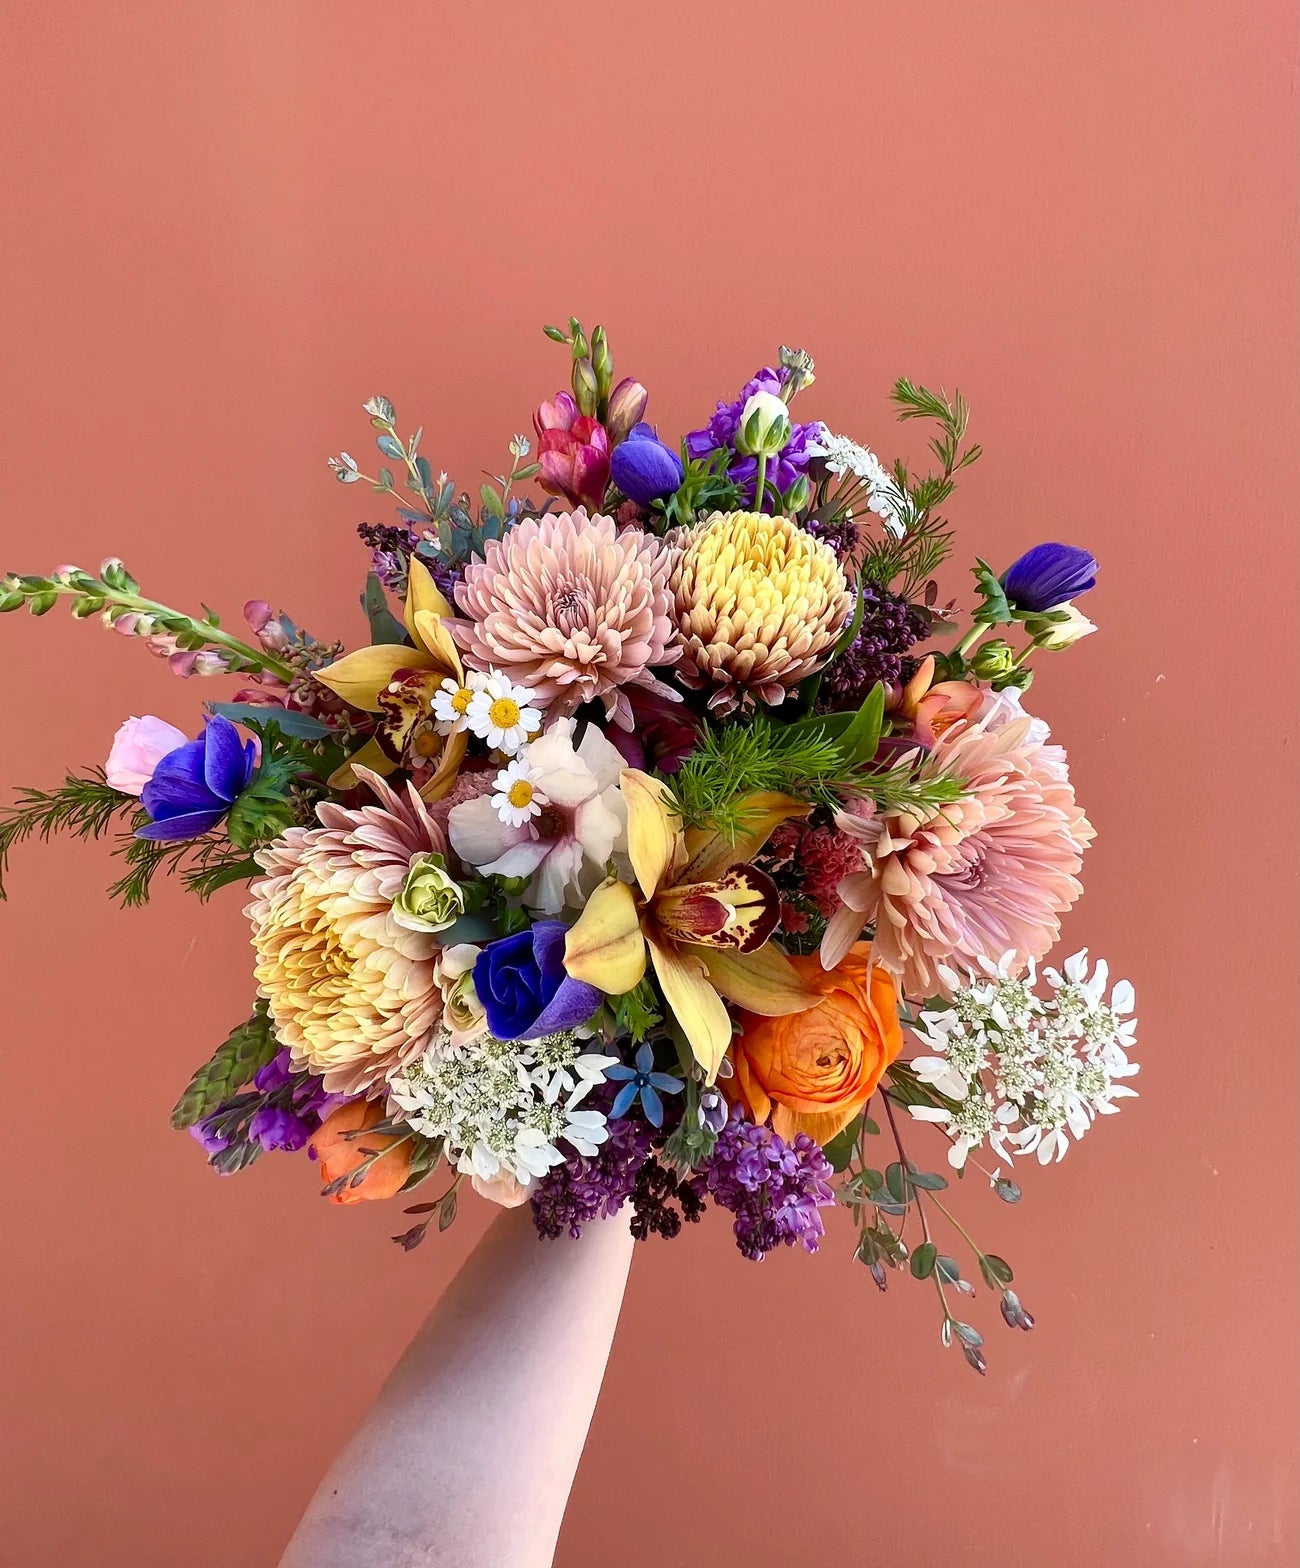 Hand-Tied Bouquet - The English Garden